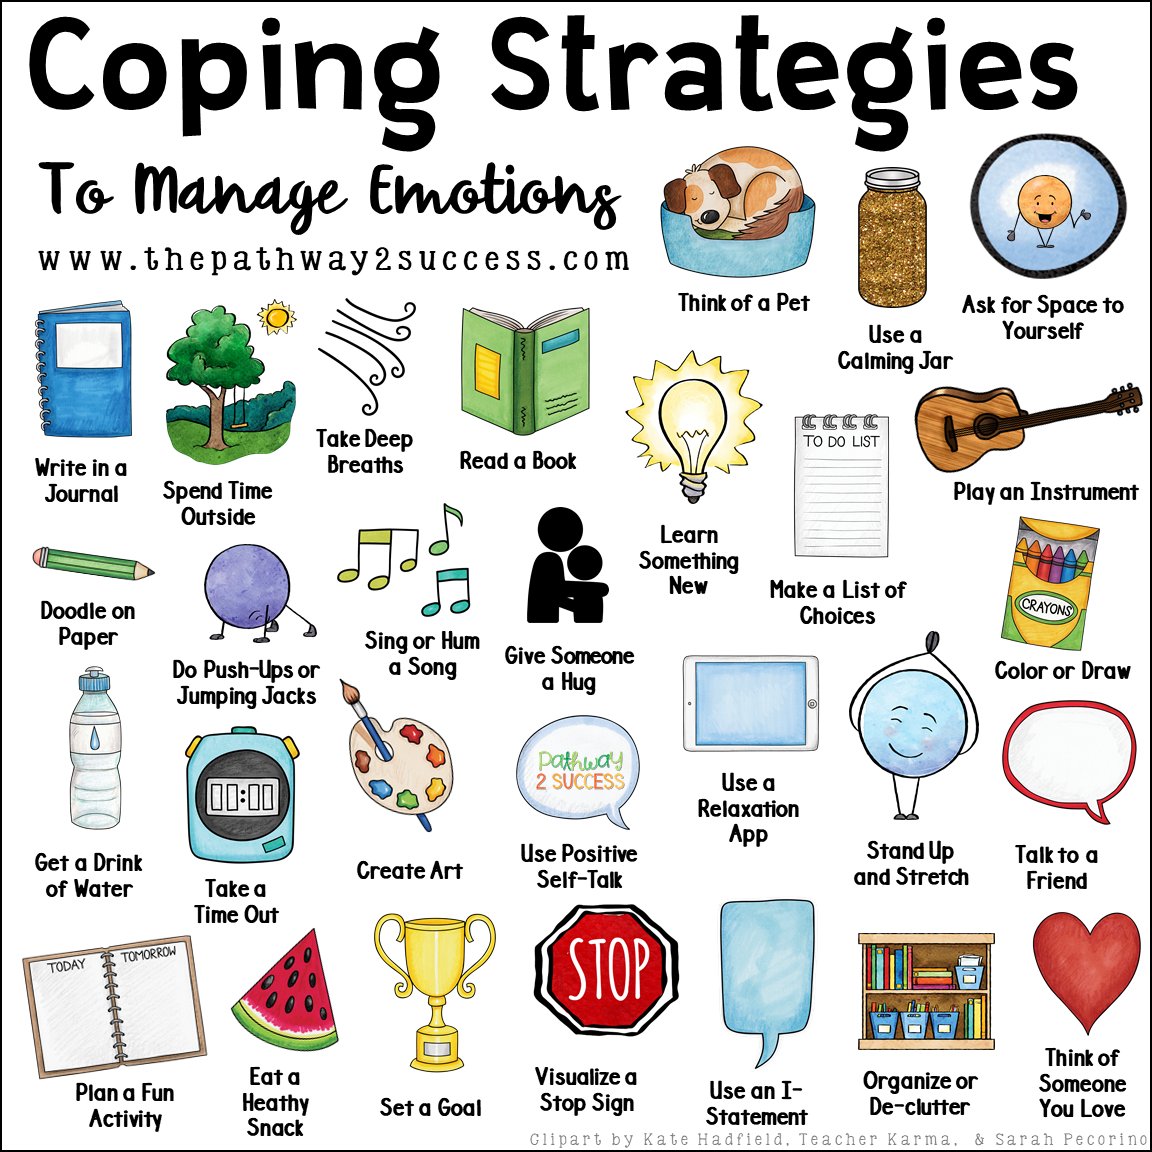 Pathway 2 Success On Twitter: "Teaching Effective Coping Strategies Is An Important Component To Social Emotional Learning #Sel #Selday #Socialemotionallearning Https://T.co/Se1Xtjtytu" / Twitter